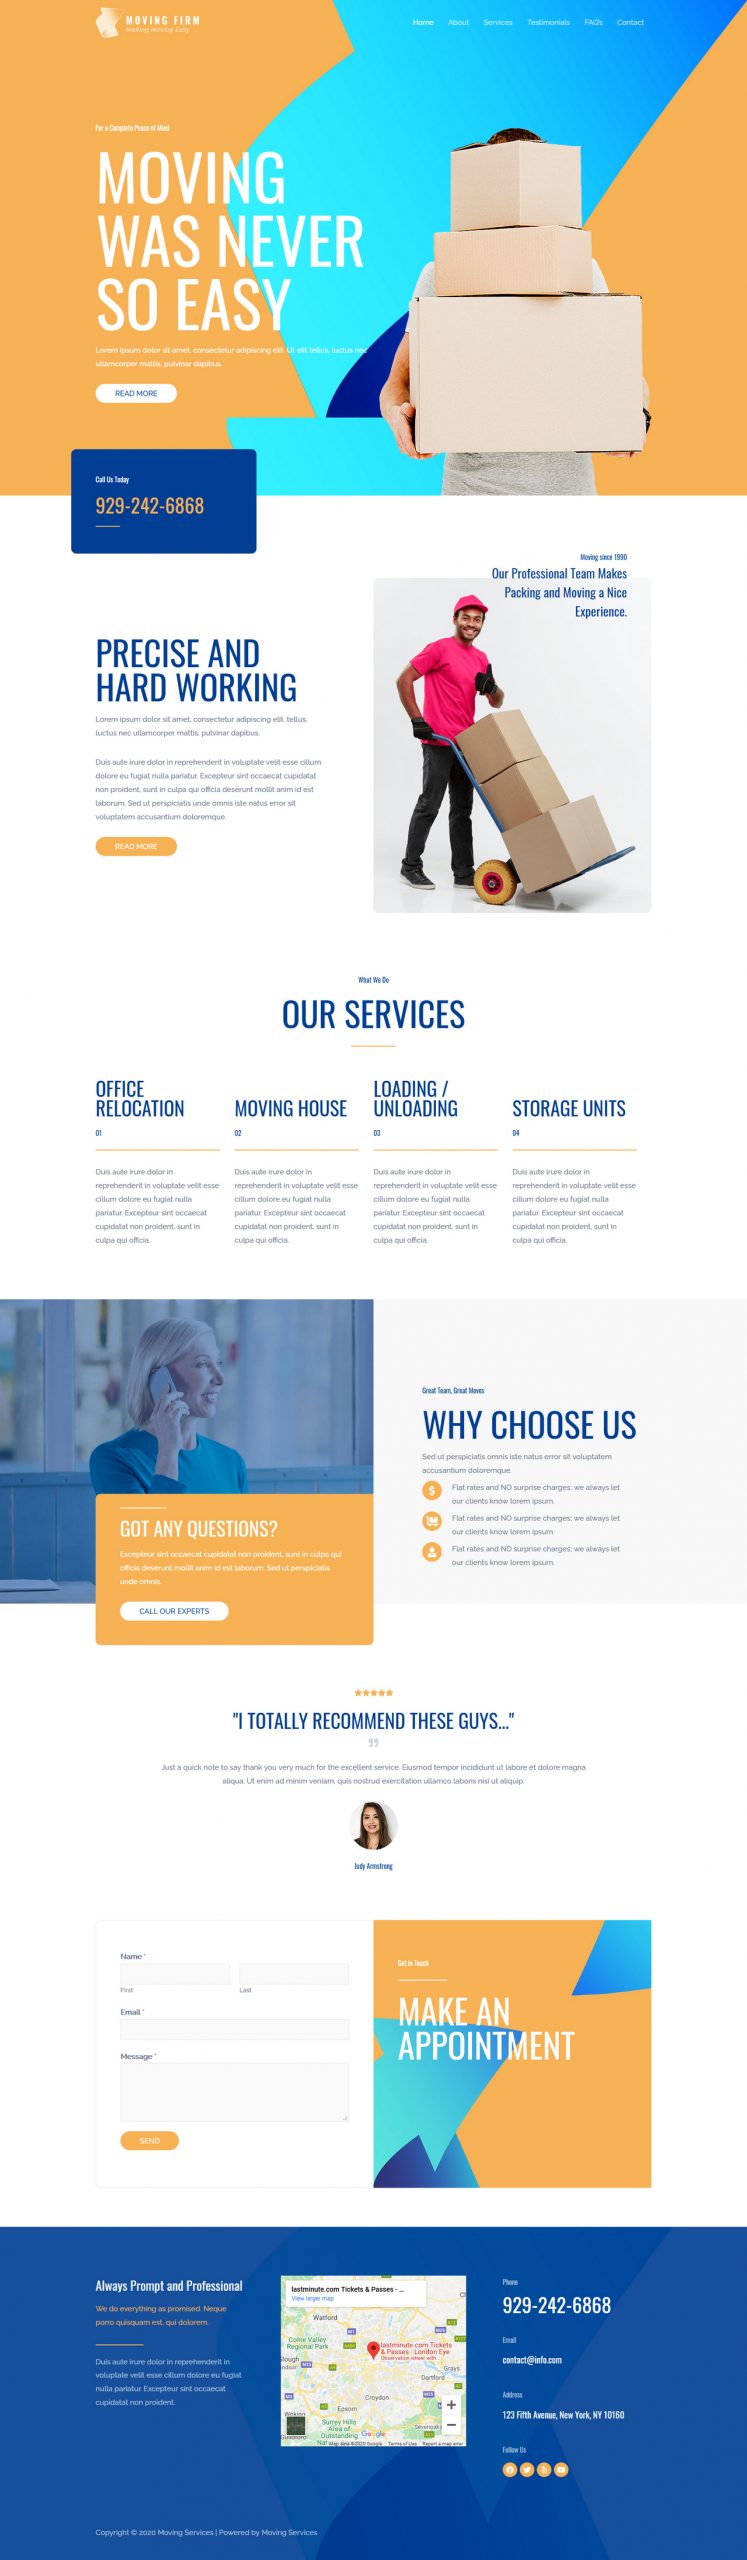 Fagowi.com Website Design Templates For Moving and Home Removals - Home Page Image